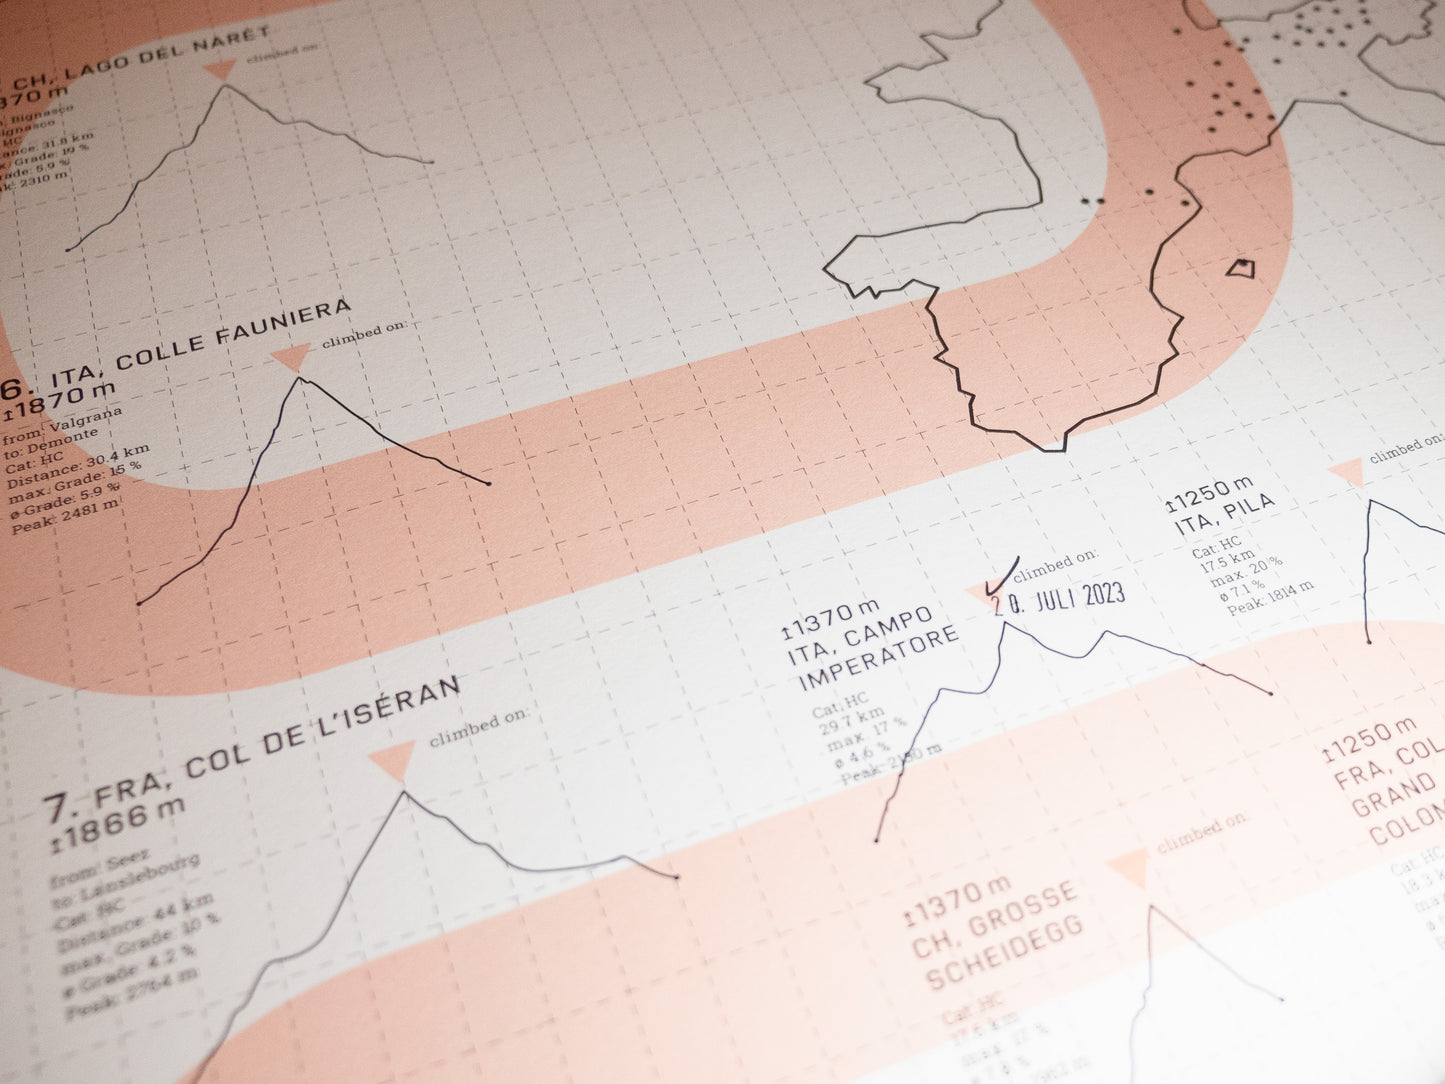 You, Me & Cycling Poster: 100 legendary road cycling climbs